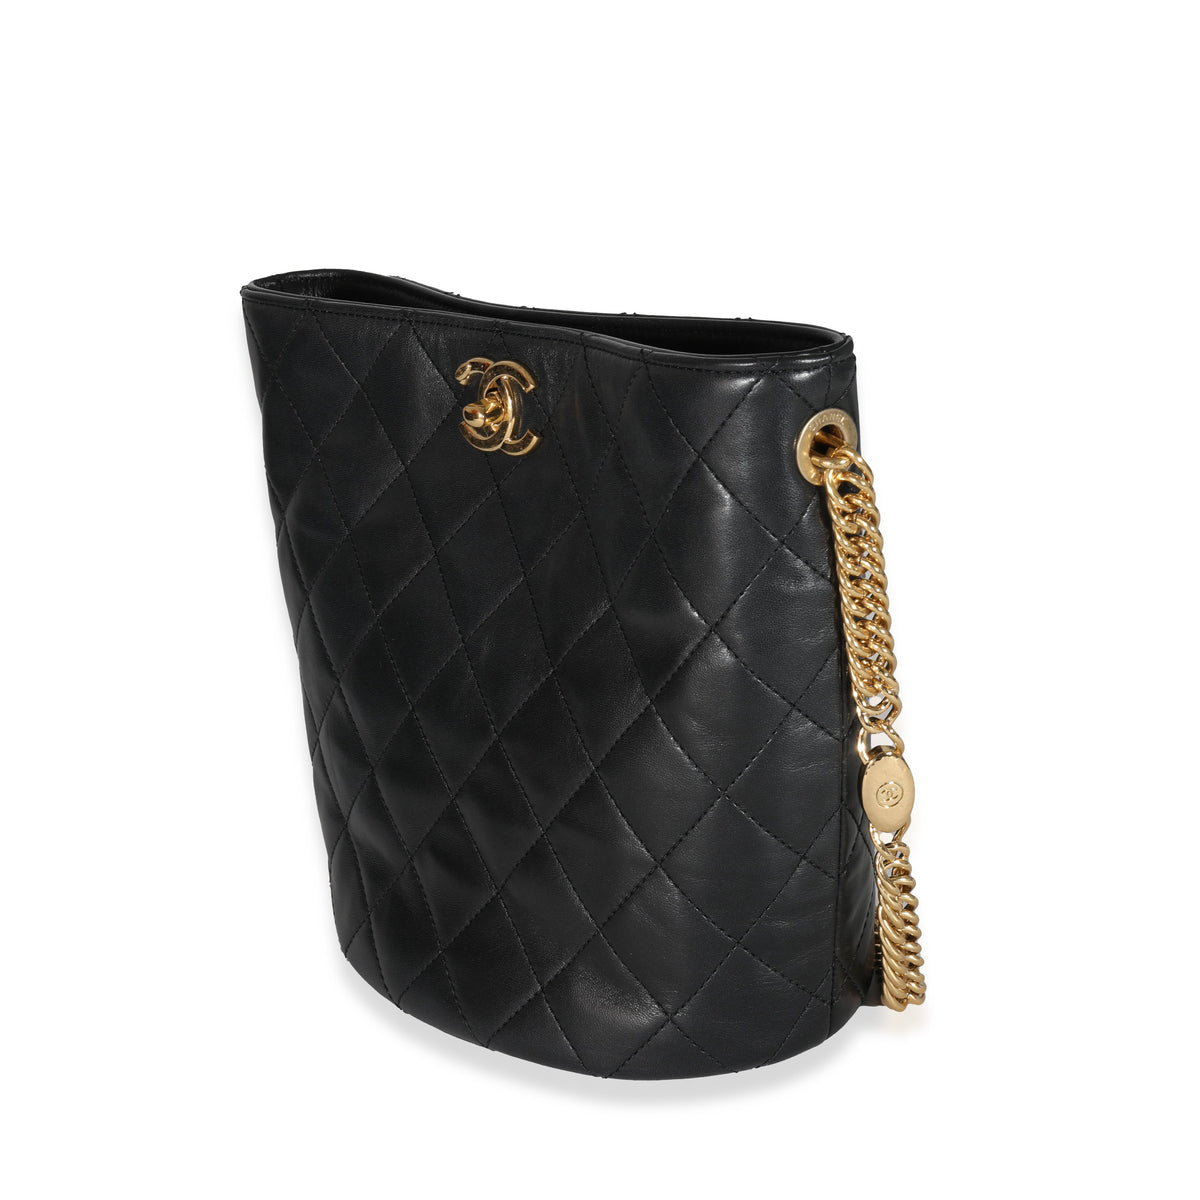 Chanel black bucket bag with logo on the front and gold detail